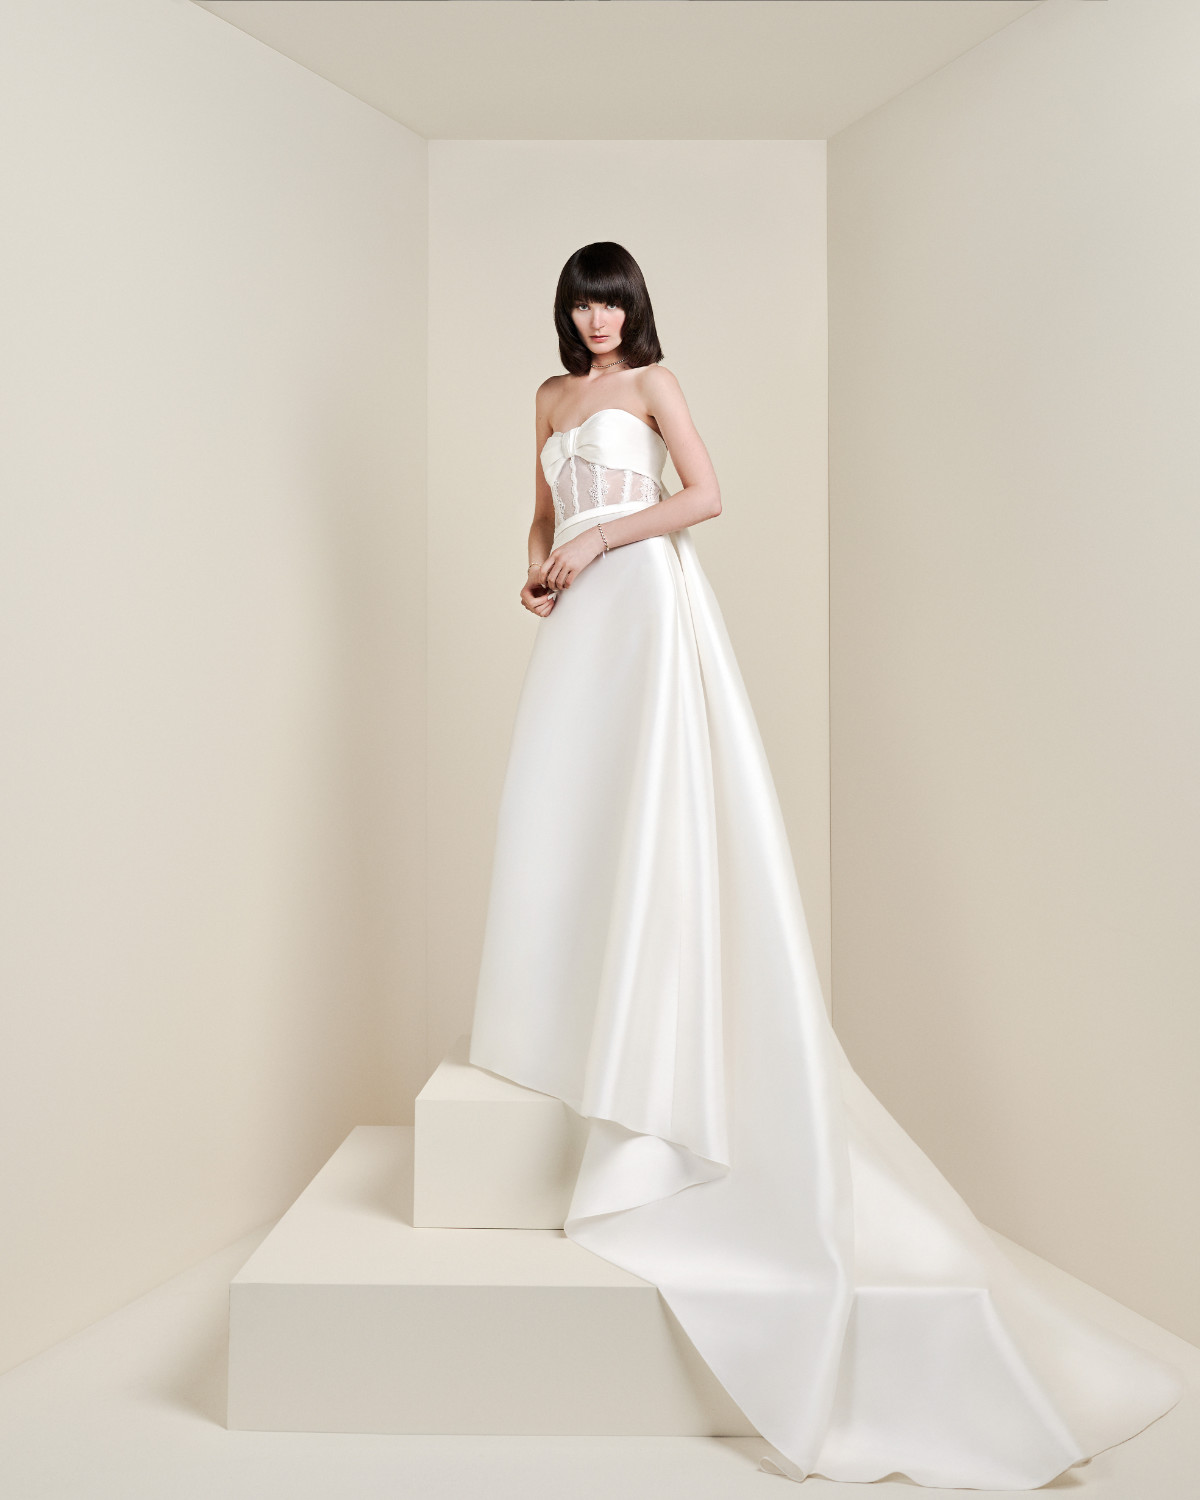 Viktor&Rolf Present Their New Mariage Spring/Summer 2025 Collection